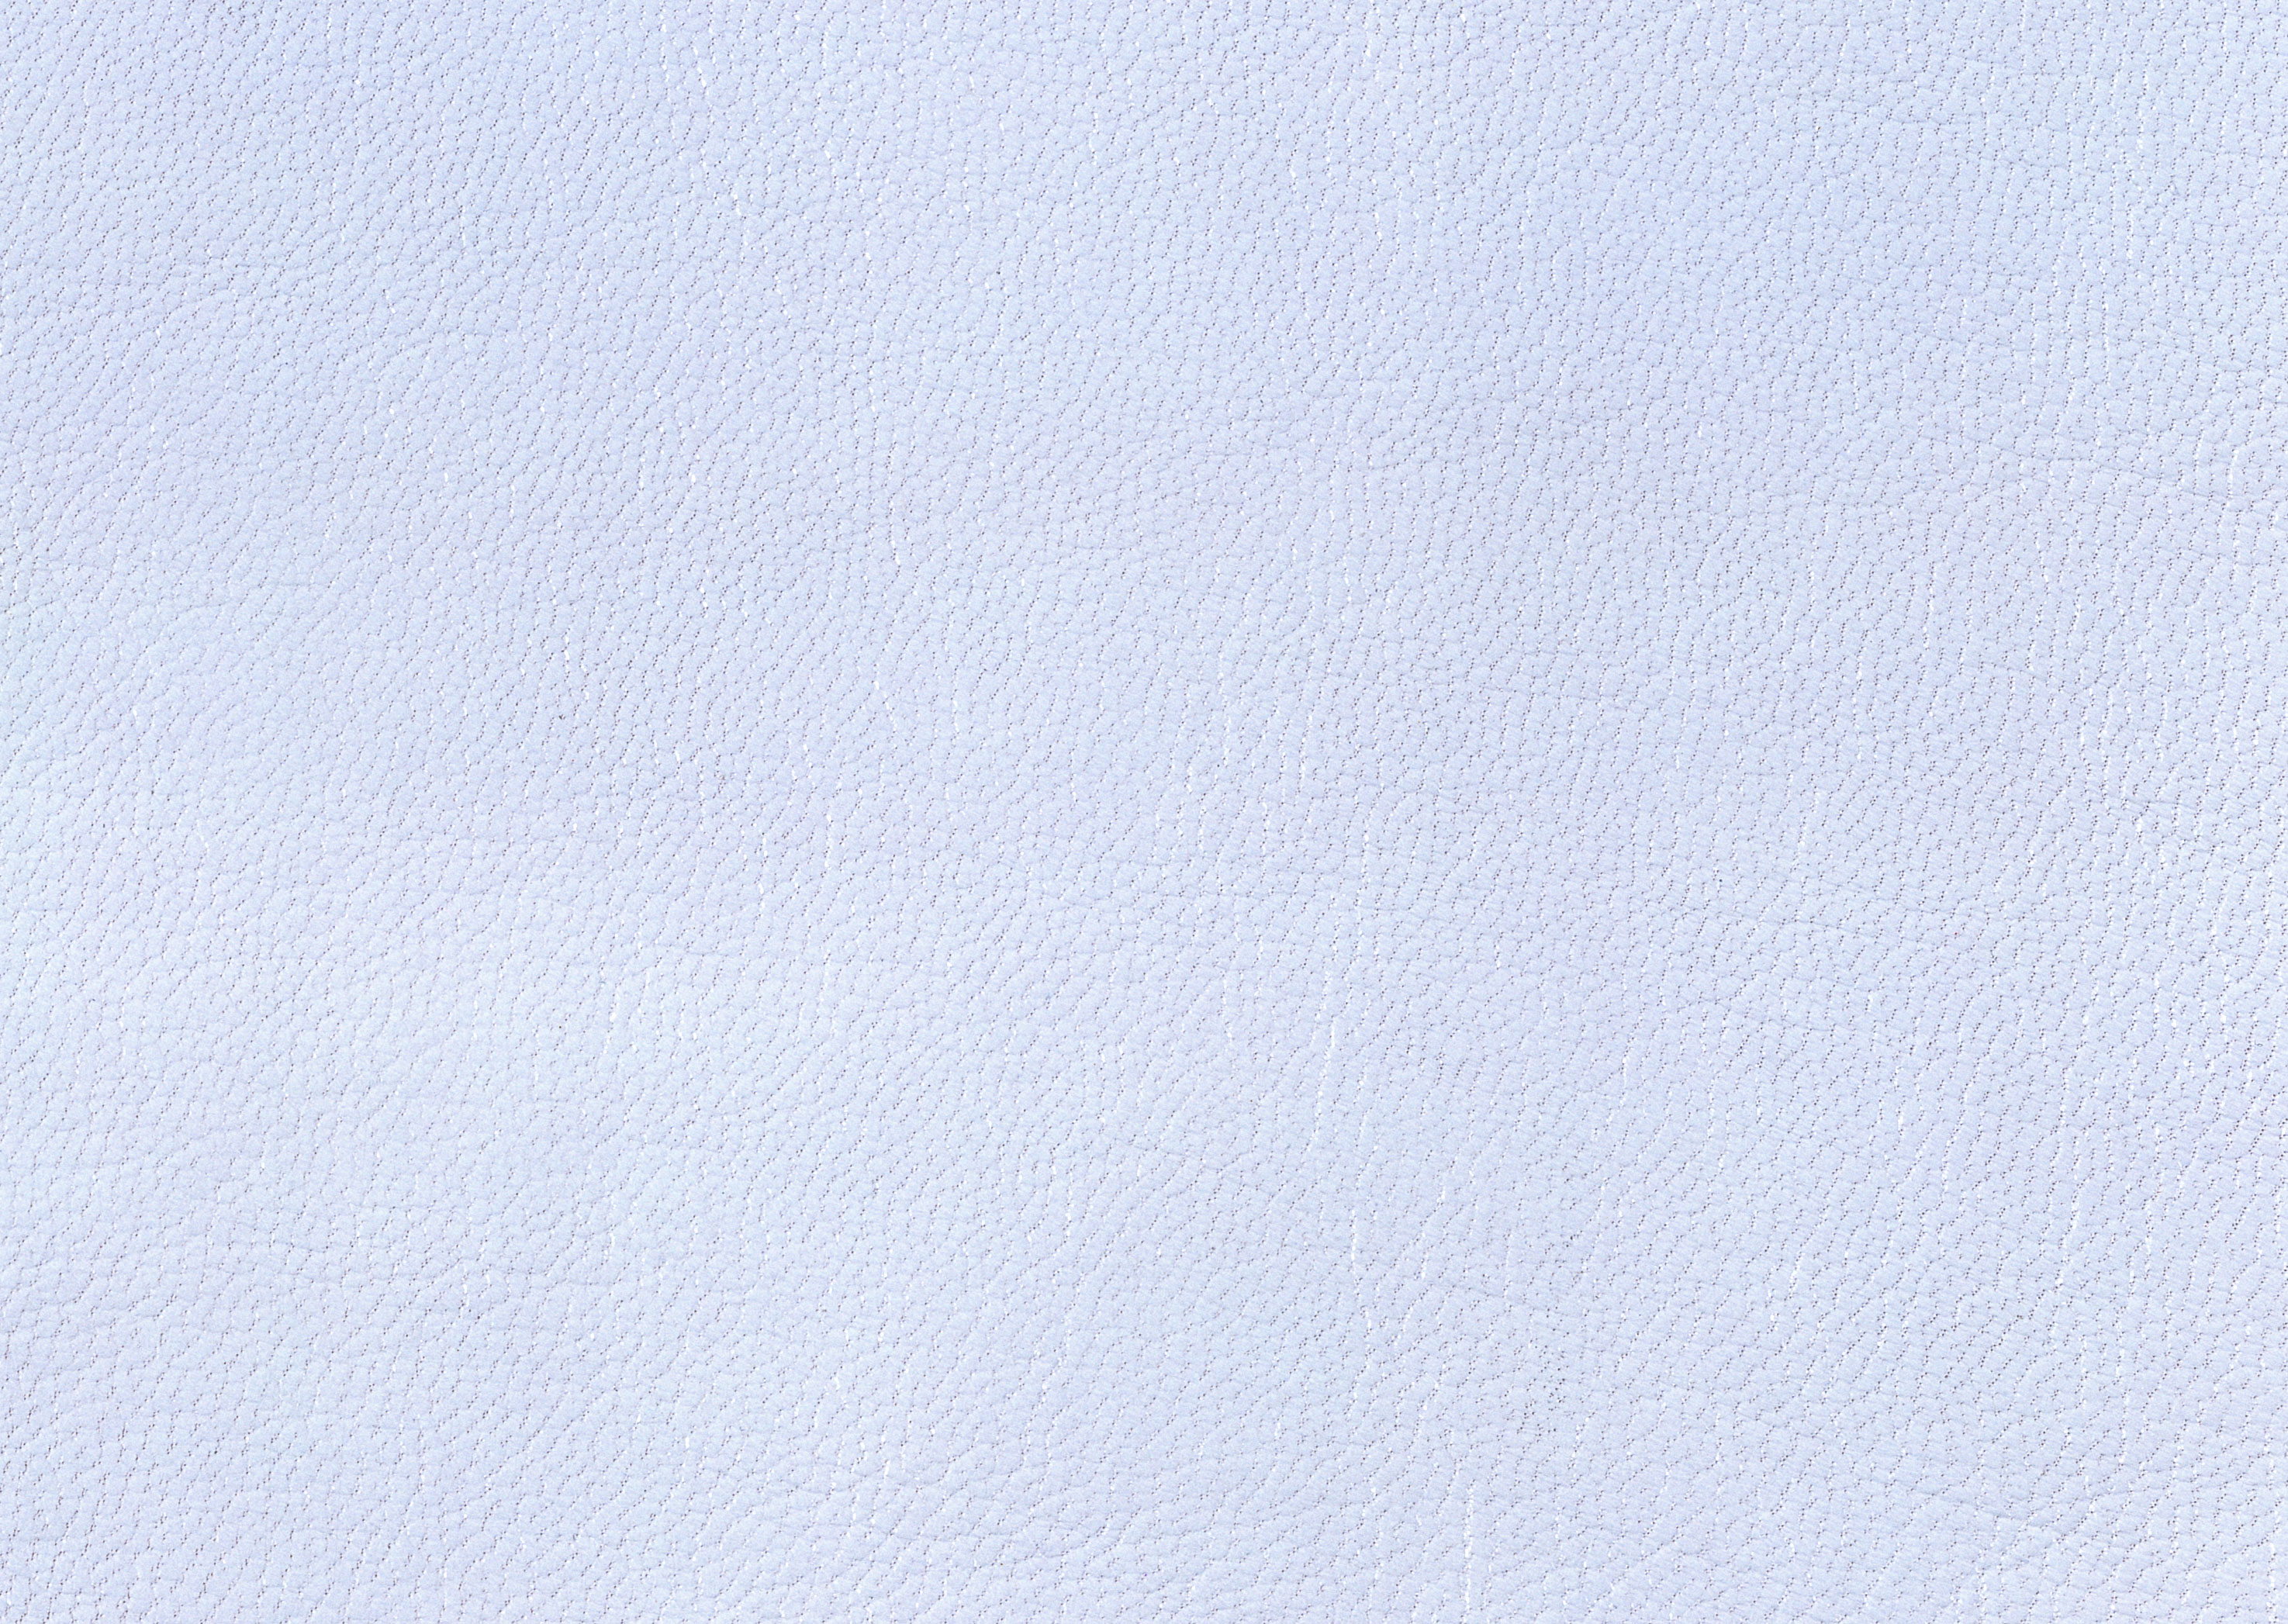 White Leather Texture Leather Texture4168 Jpg Art